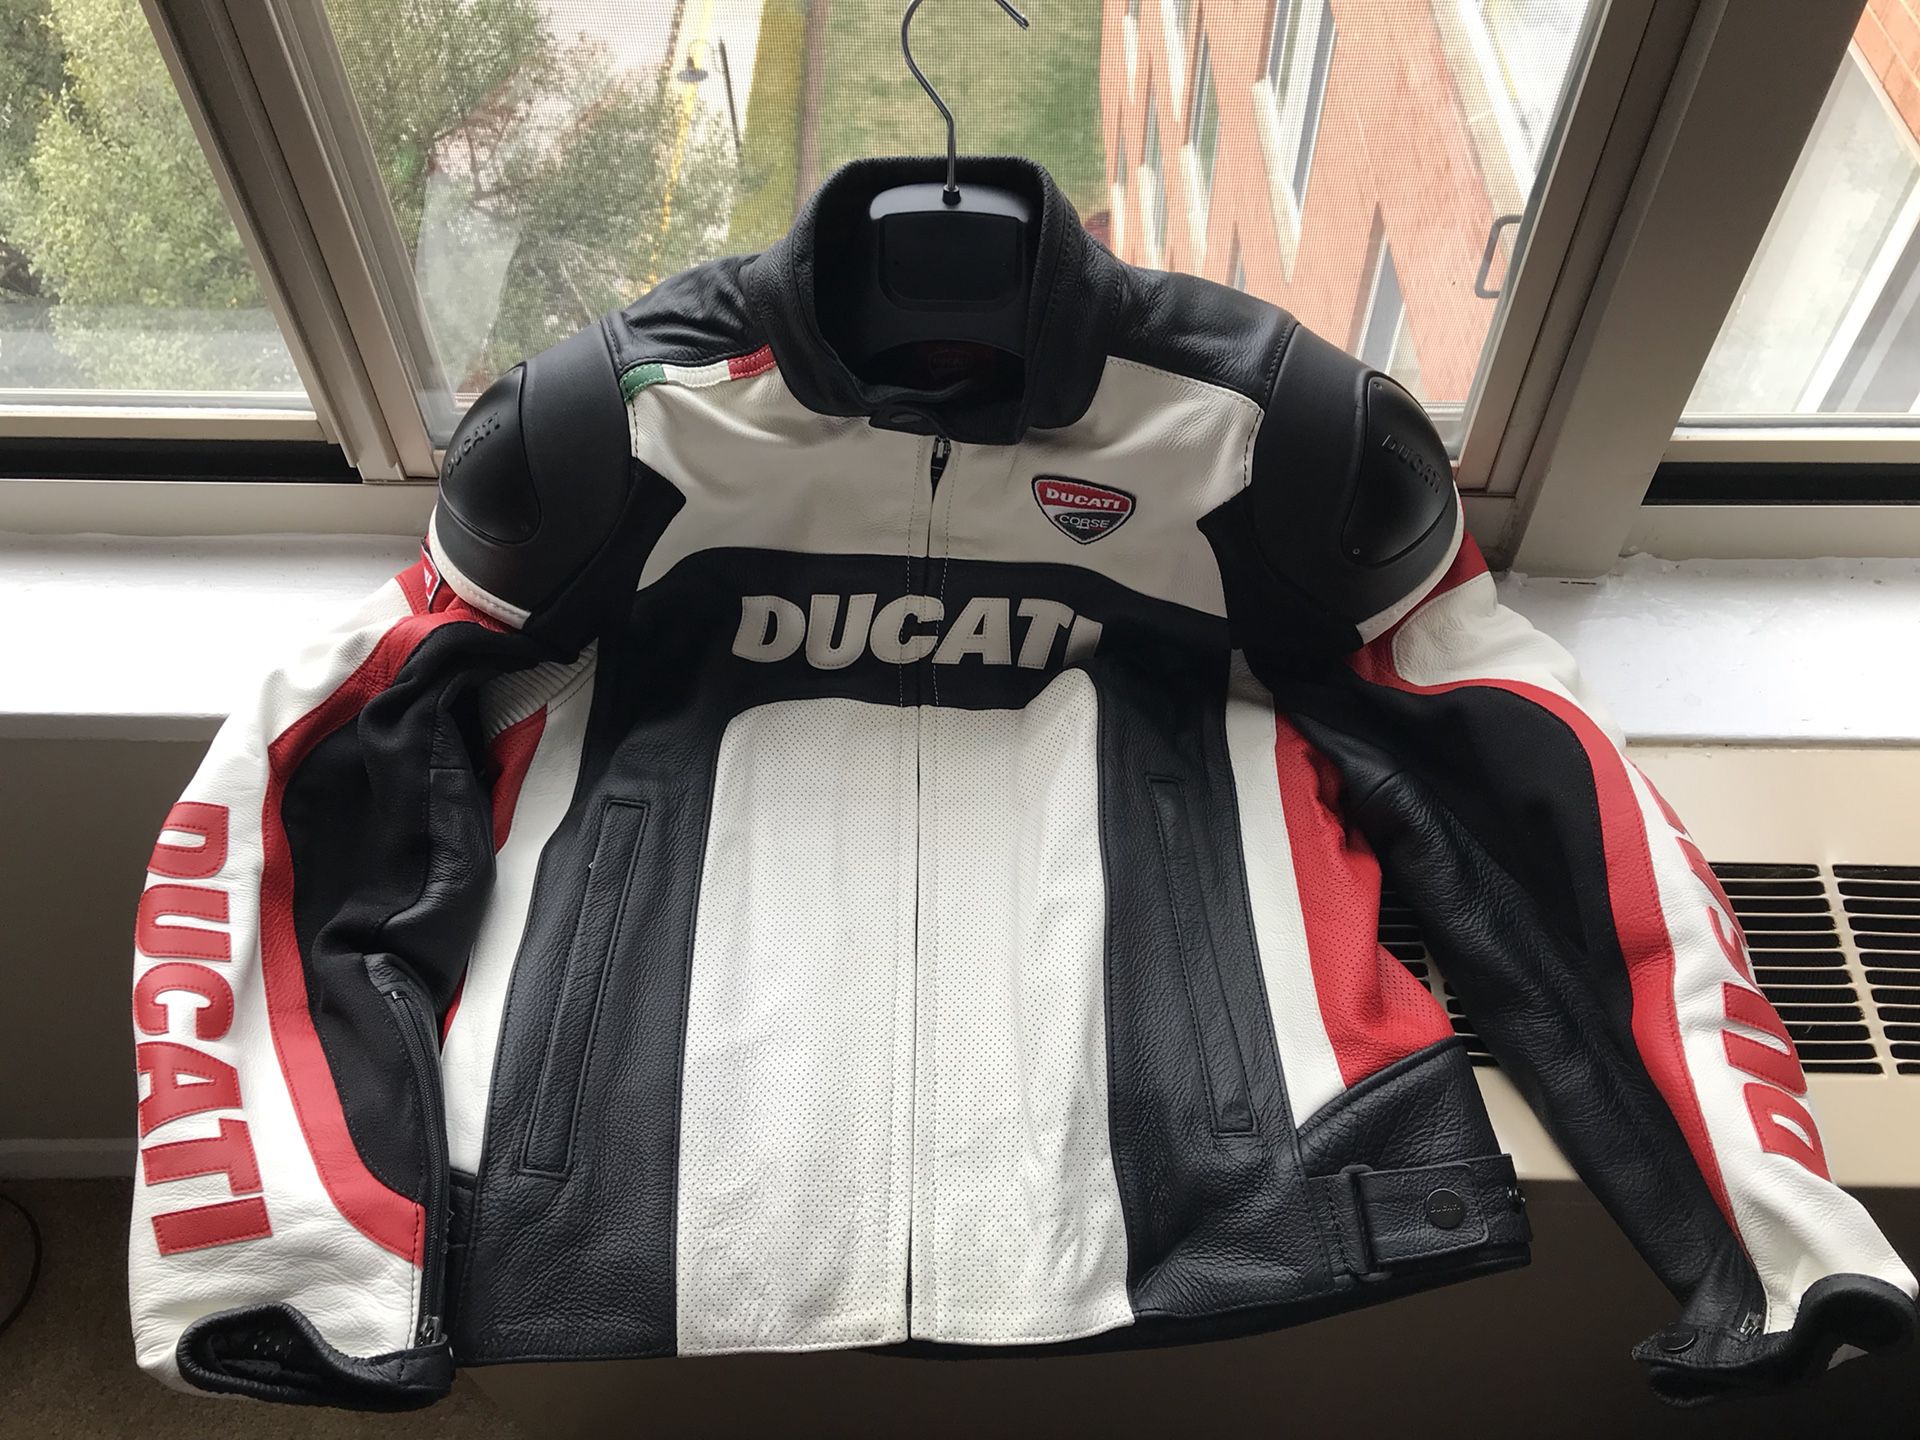 Ducati Corse Motorcycle Perforated Leather Jacket Size 50 IT (US Size 40 or M) for $285 or Best Offer